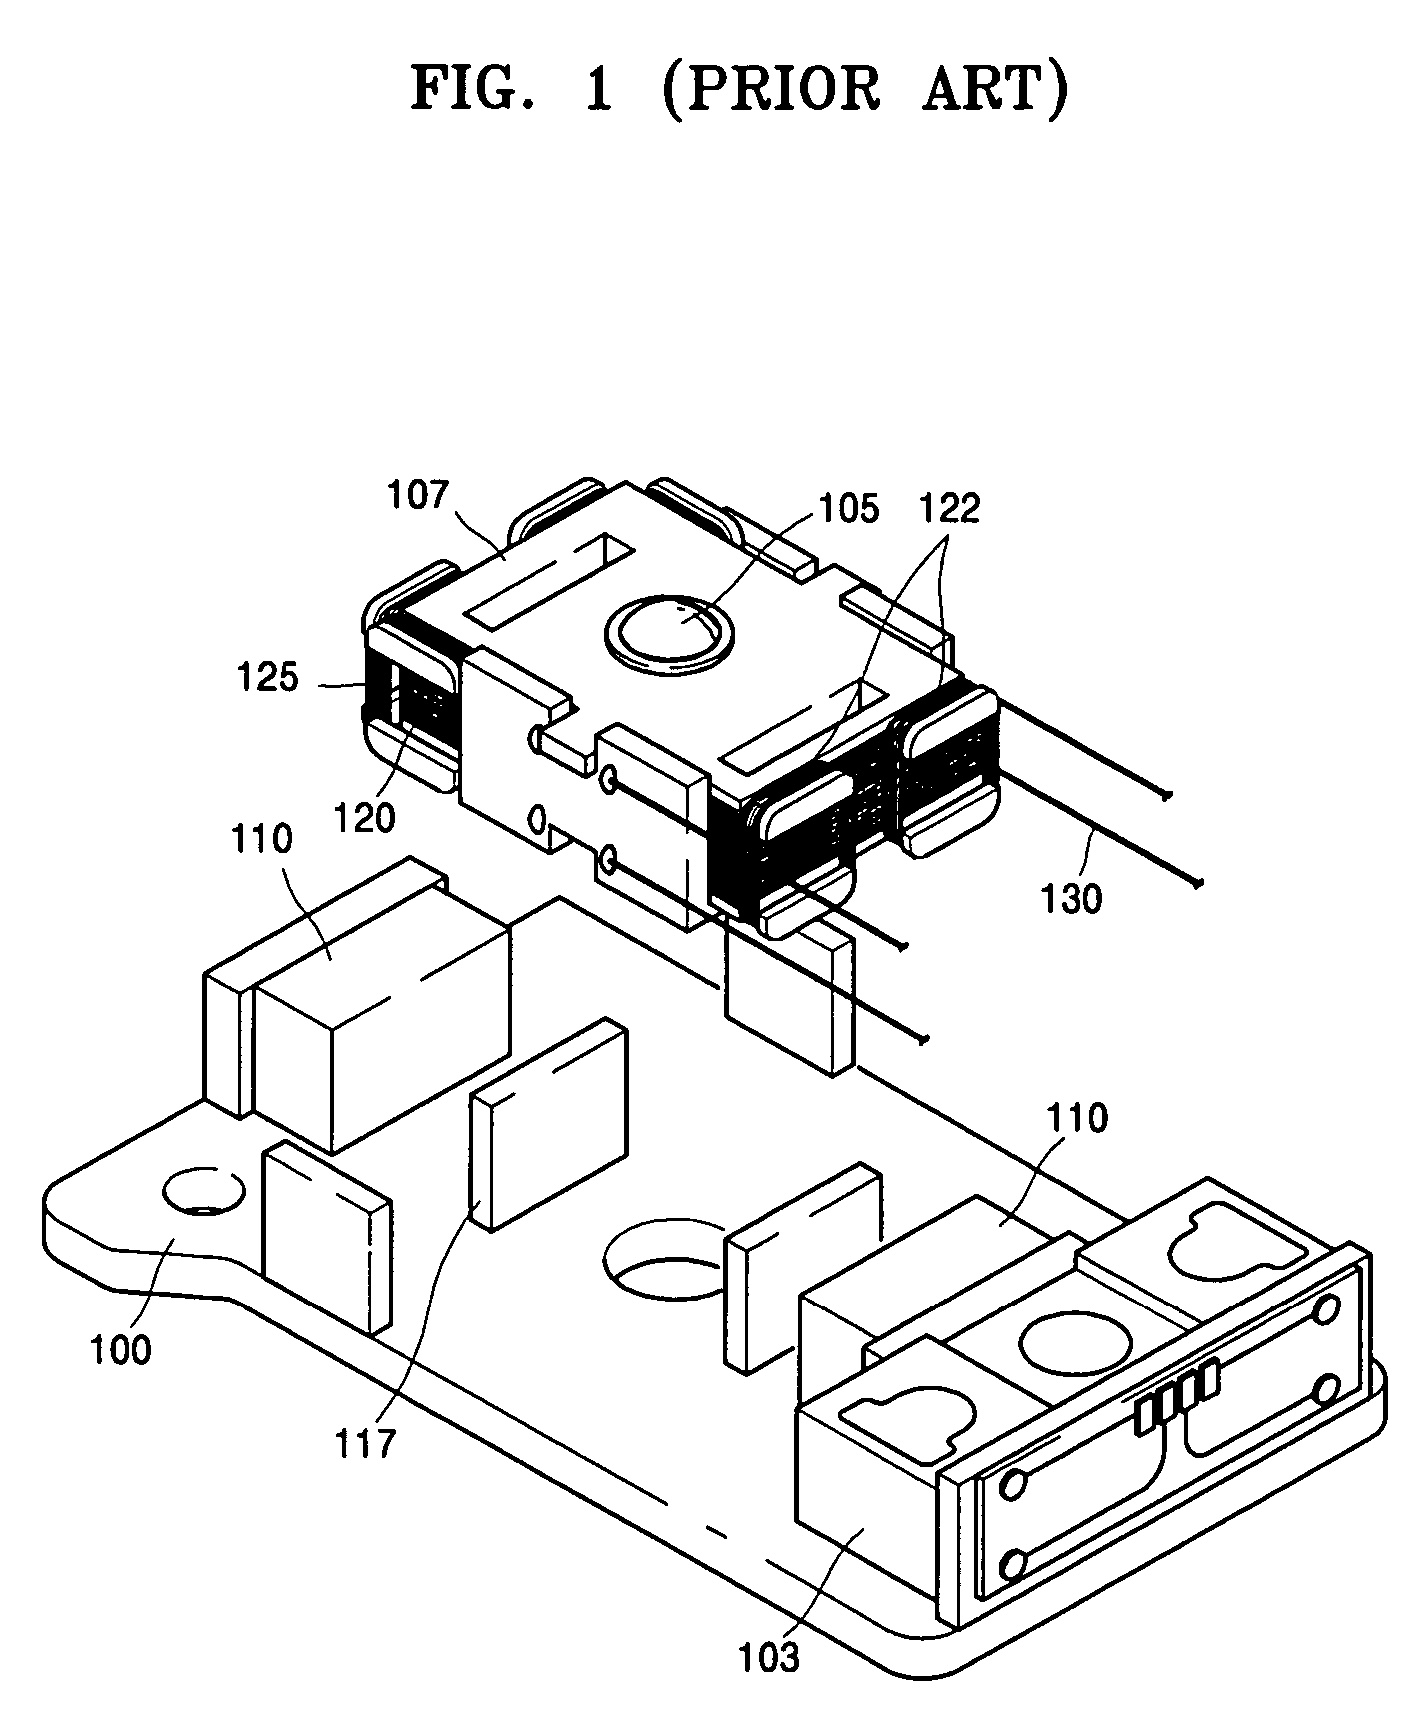 Recording and/or reproducing apparatus with an optical pickup actuator having high thrust